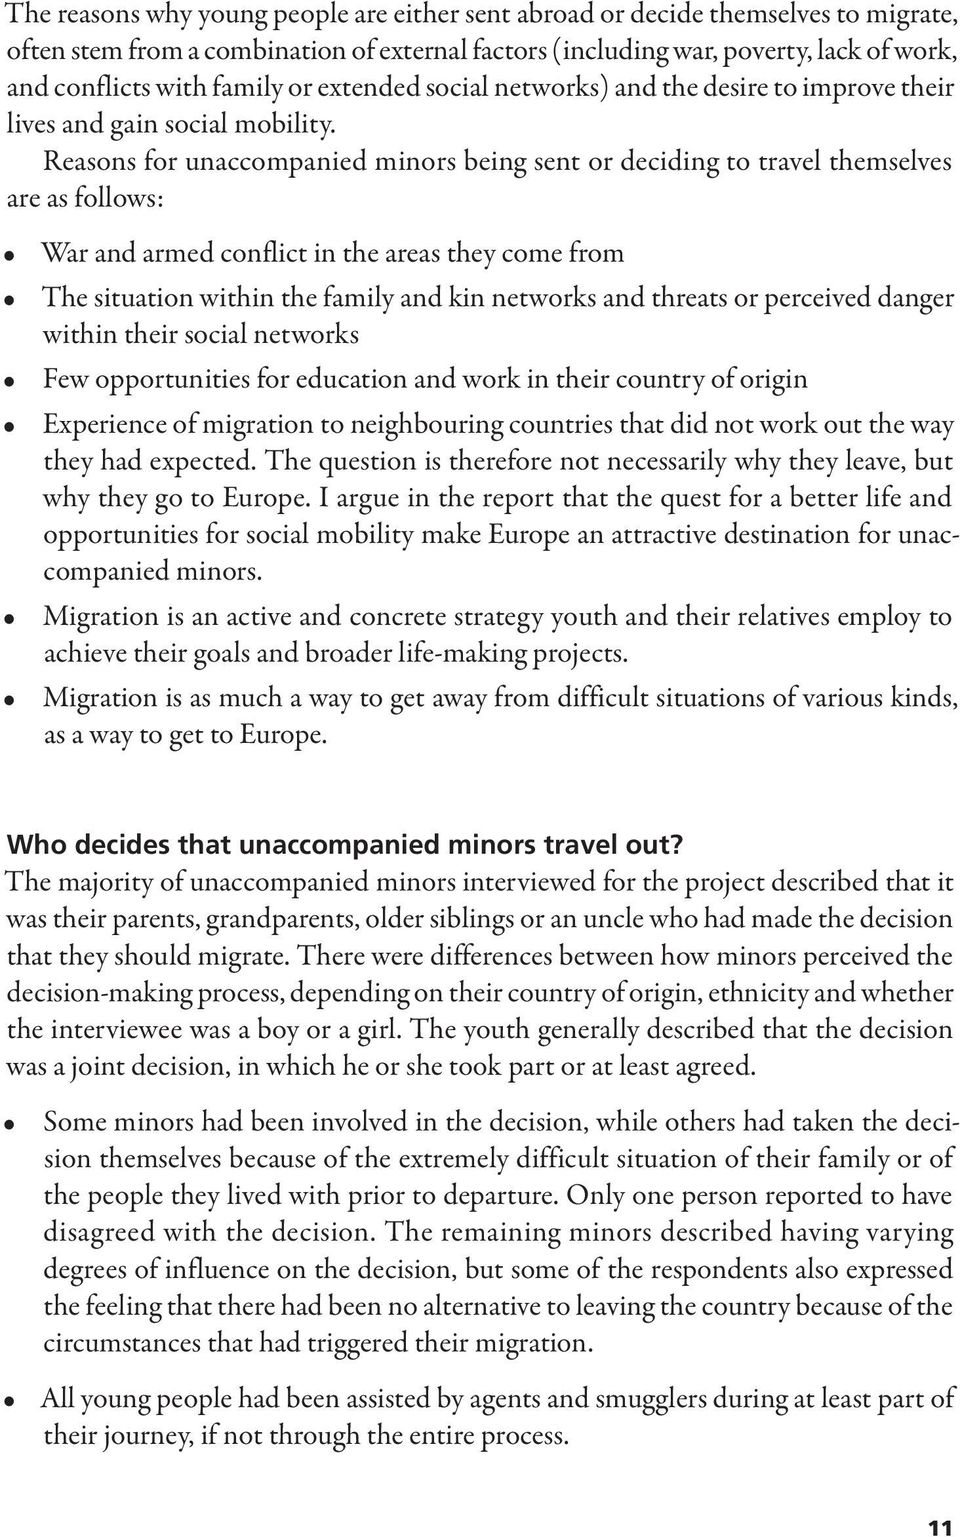 Reasons for unaccompanied minors being sent or deciding to travel themselves are as follows: War and armed conflict in the areas they come from The situation within the family and kin networks and